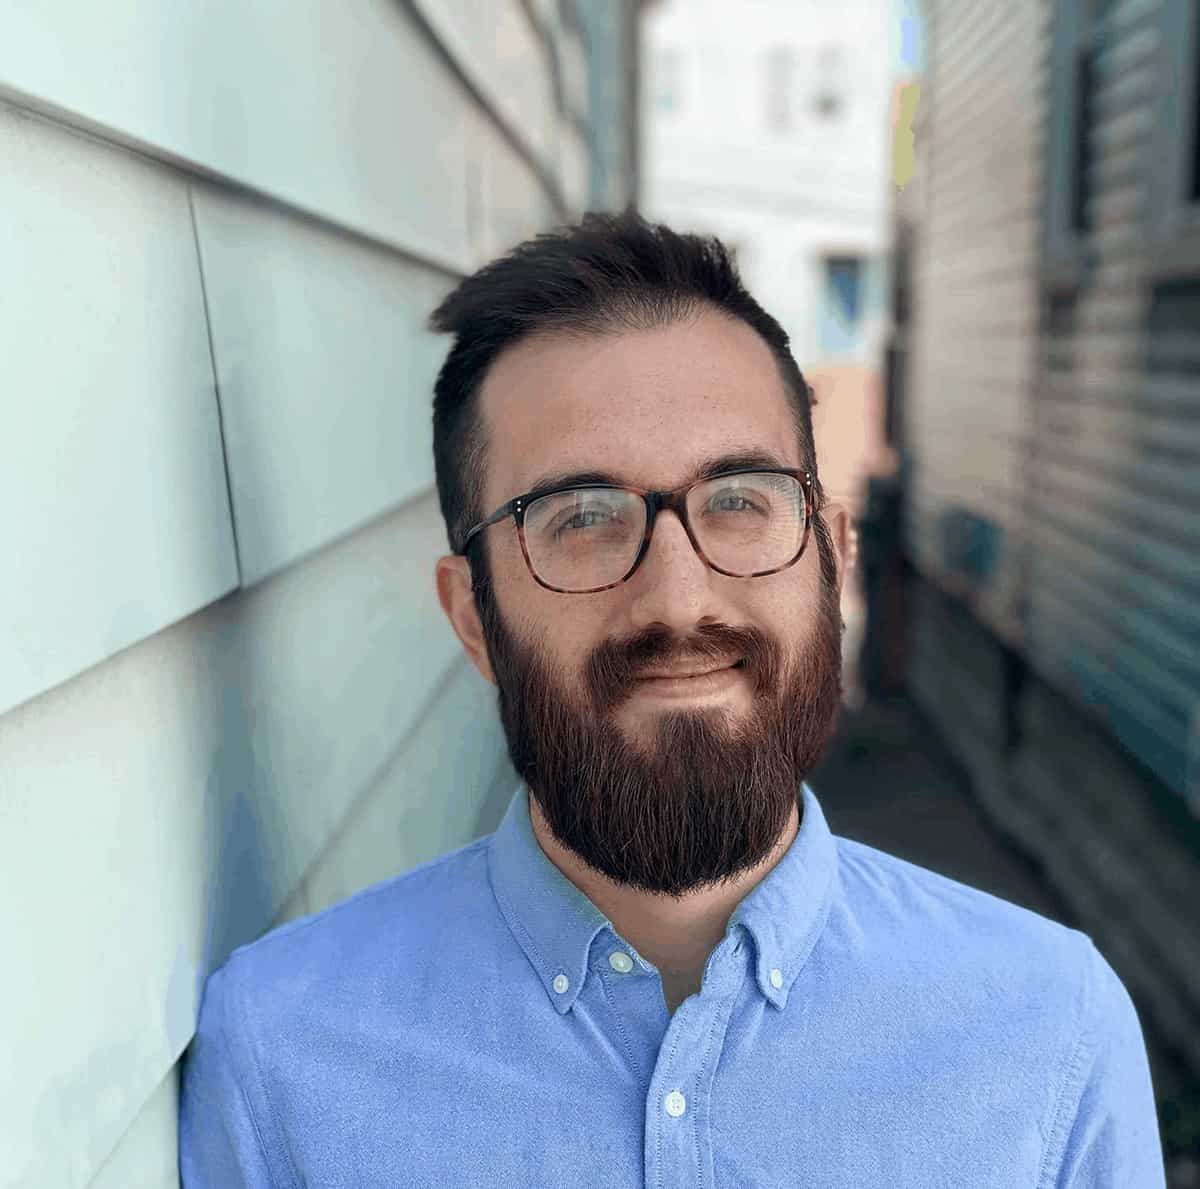 male with glasses and beard